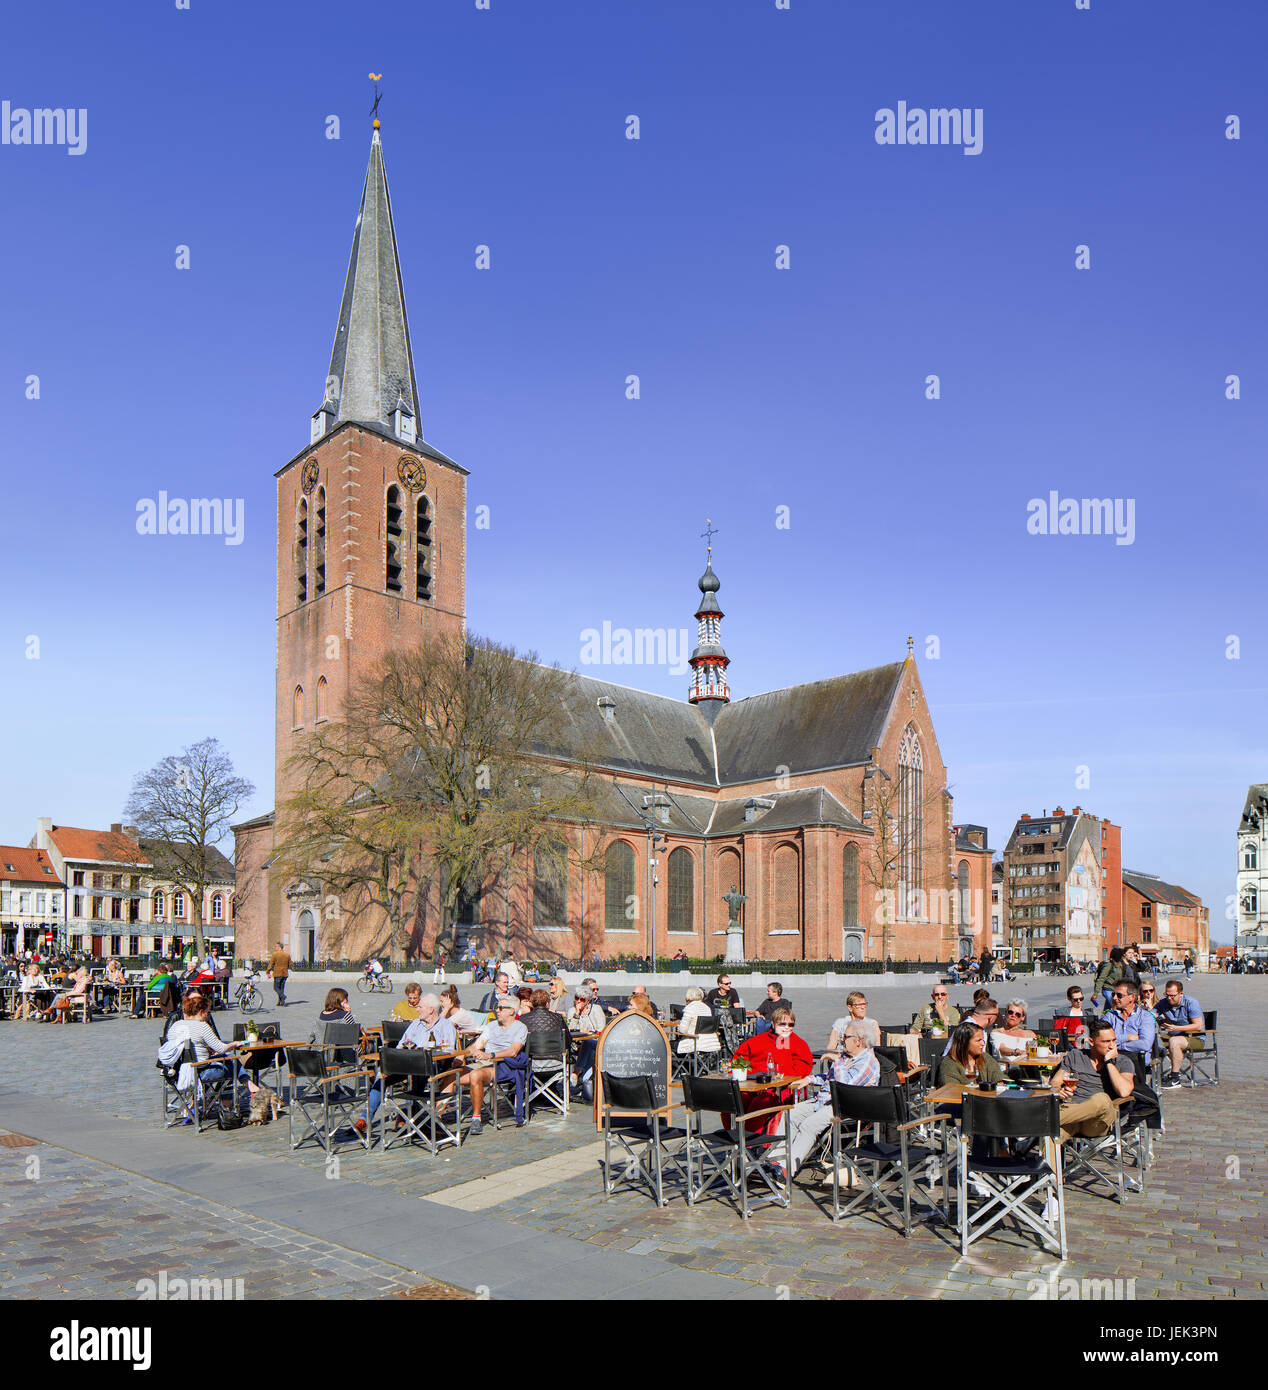 TURNHOUT-MARCH 28, 2017. Local tourists enjoy a terrace in Turnhout, Belgium. In recent years, hospitality industry was fastest-growing for emplyment. Stock Photo